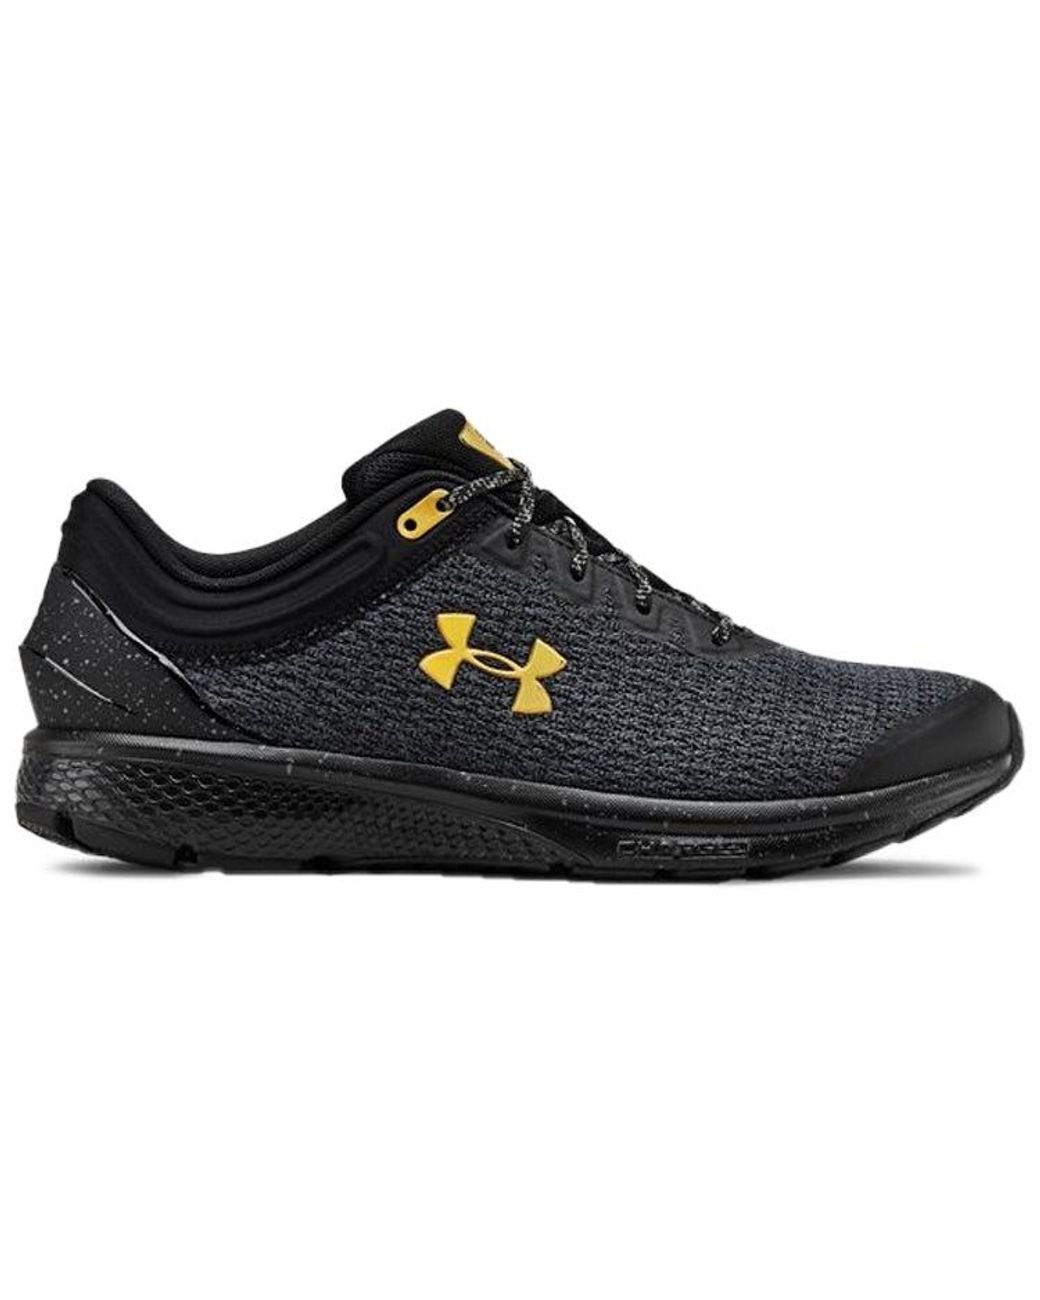 Under Armour Charged Escape 3 Reflection Black for Men